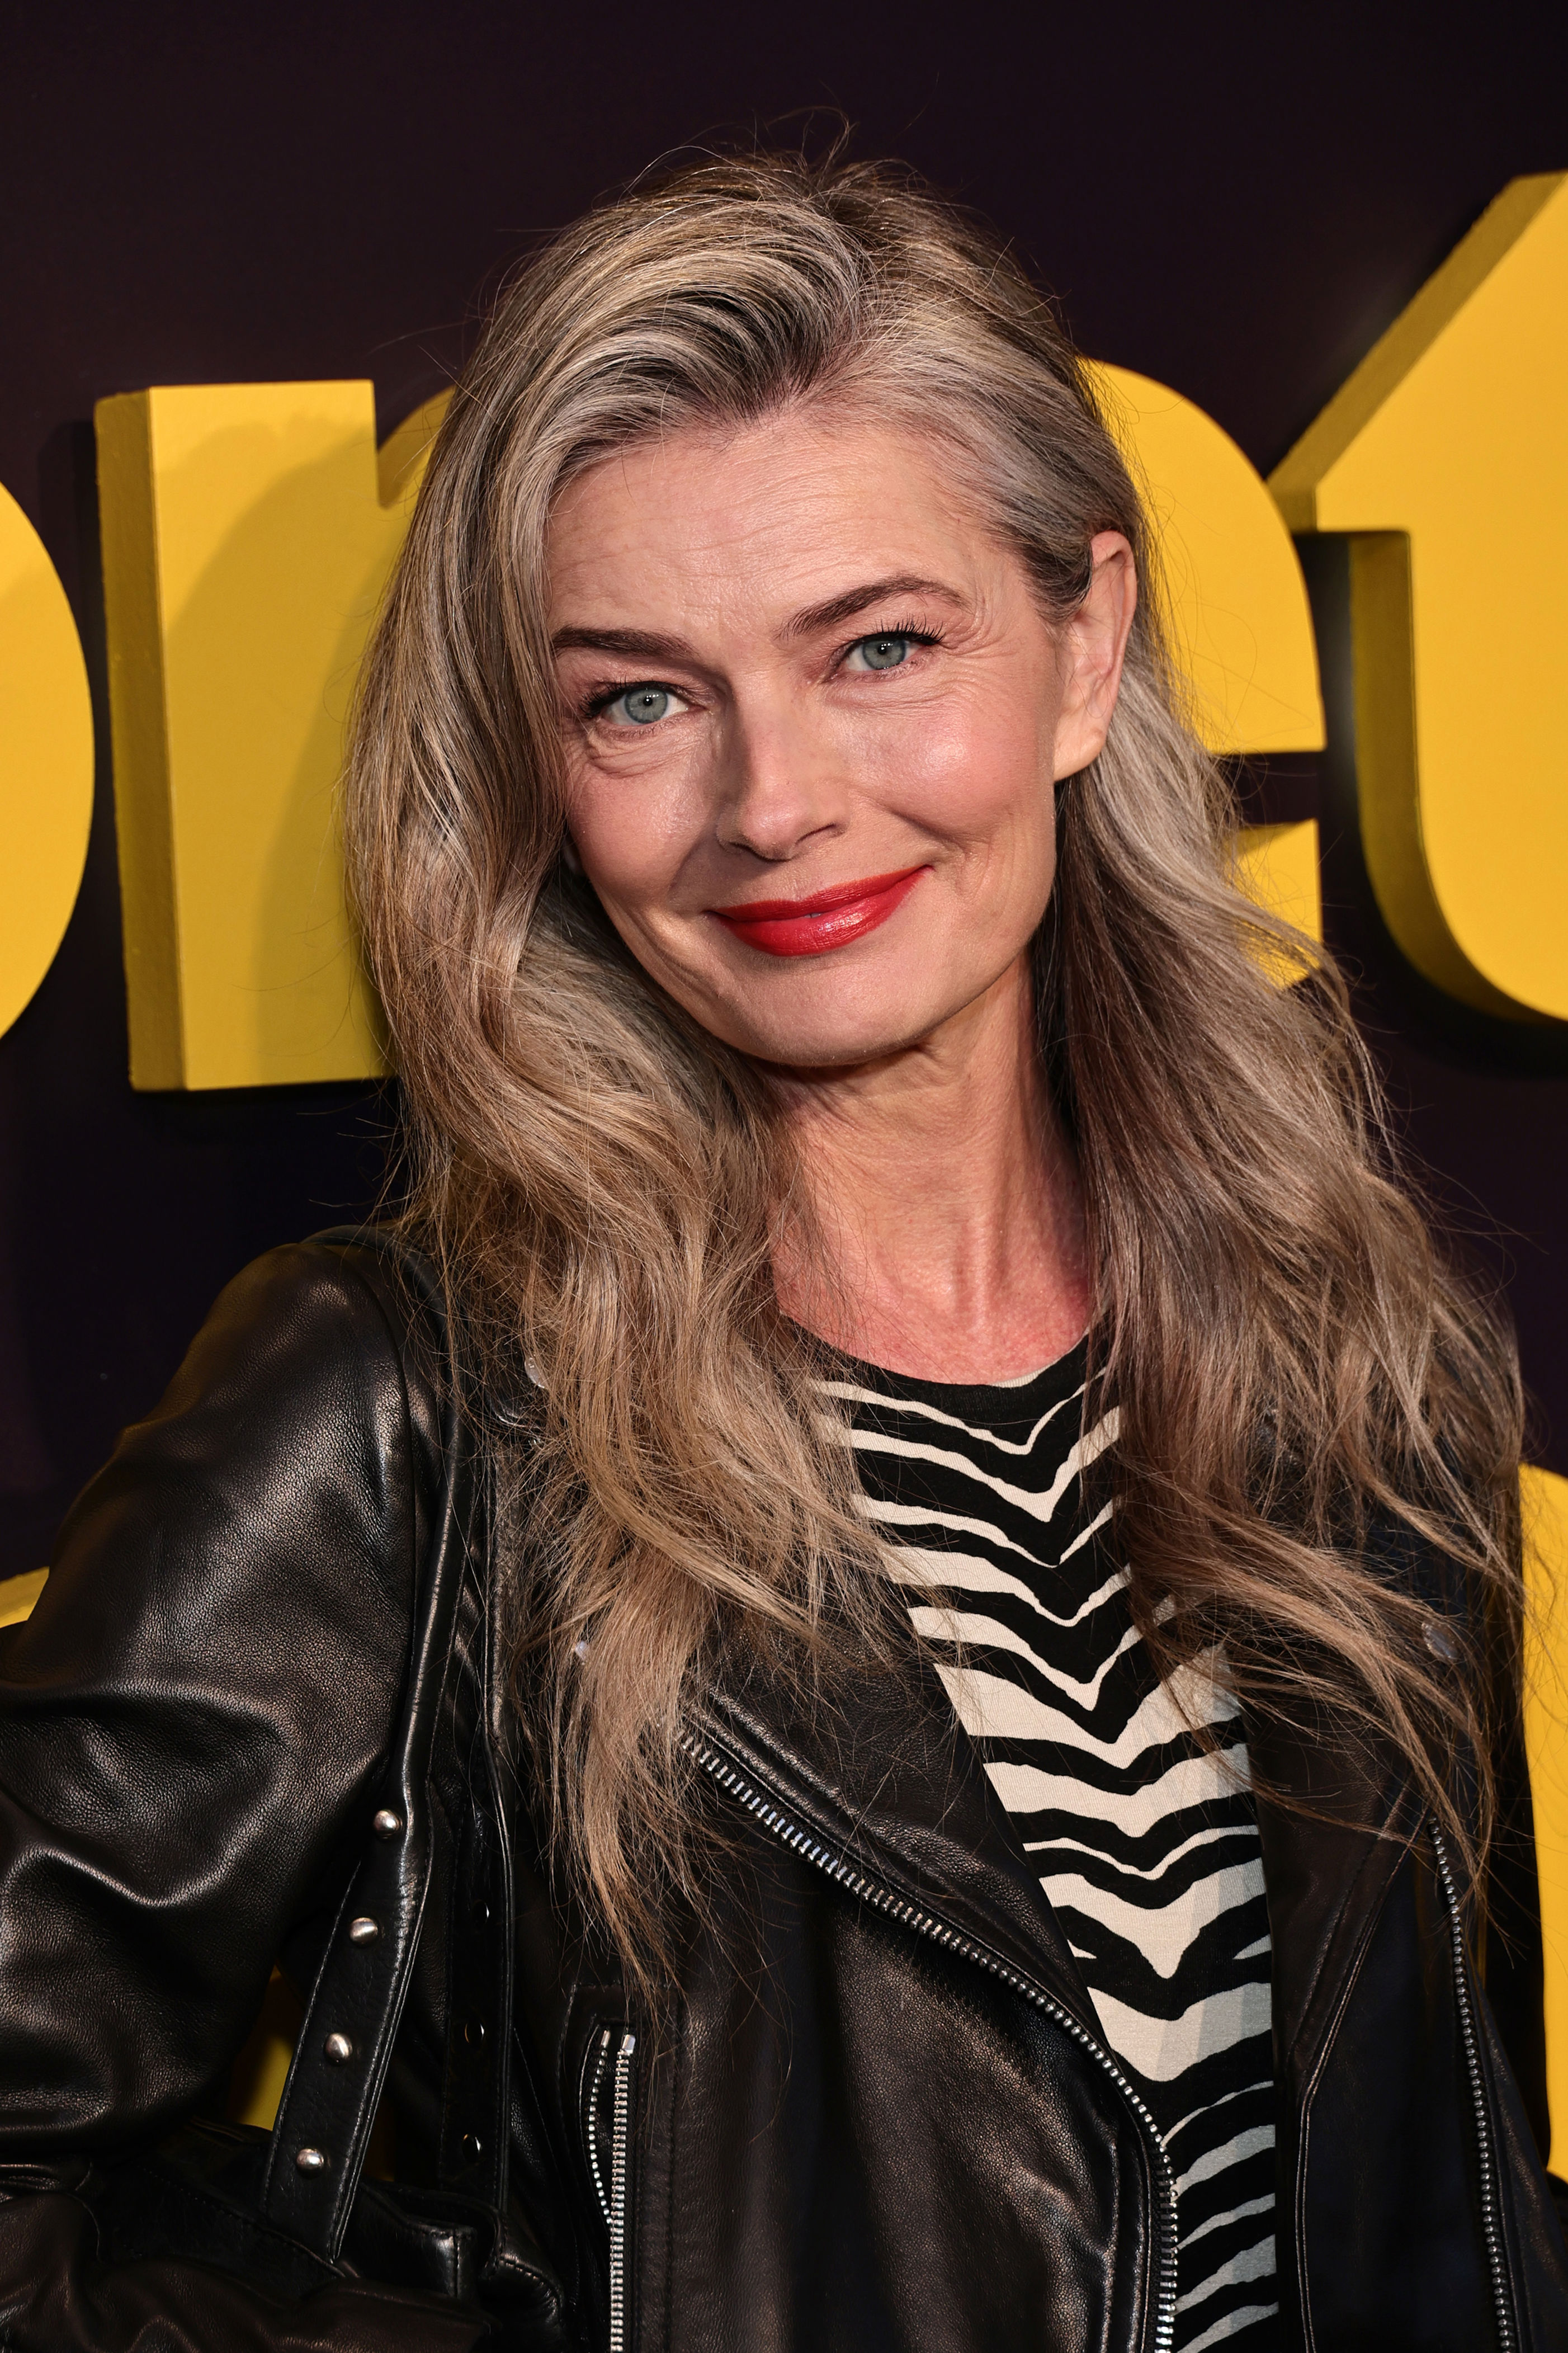 <p>Paulina Porizkova, who just happens to be our <a href="https://www.sheknows.com/special-series/money-issue-paulina-porizkova/">latest digital issue cover star</a>, often gifts her fans with bikini-clad videos and photos. Her <a href="https://www.instagram.com/p/CoaQjl4jw0H/">latest video</a>, which compiled many photos of her at the beach, also included some wise words from author Kerry Egan in the caption. “Too often, it’s only as people realize that they will lose their bodies that they finally appreciate how truly wonderful the body is,” the caption reads.</p>